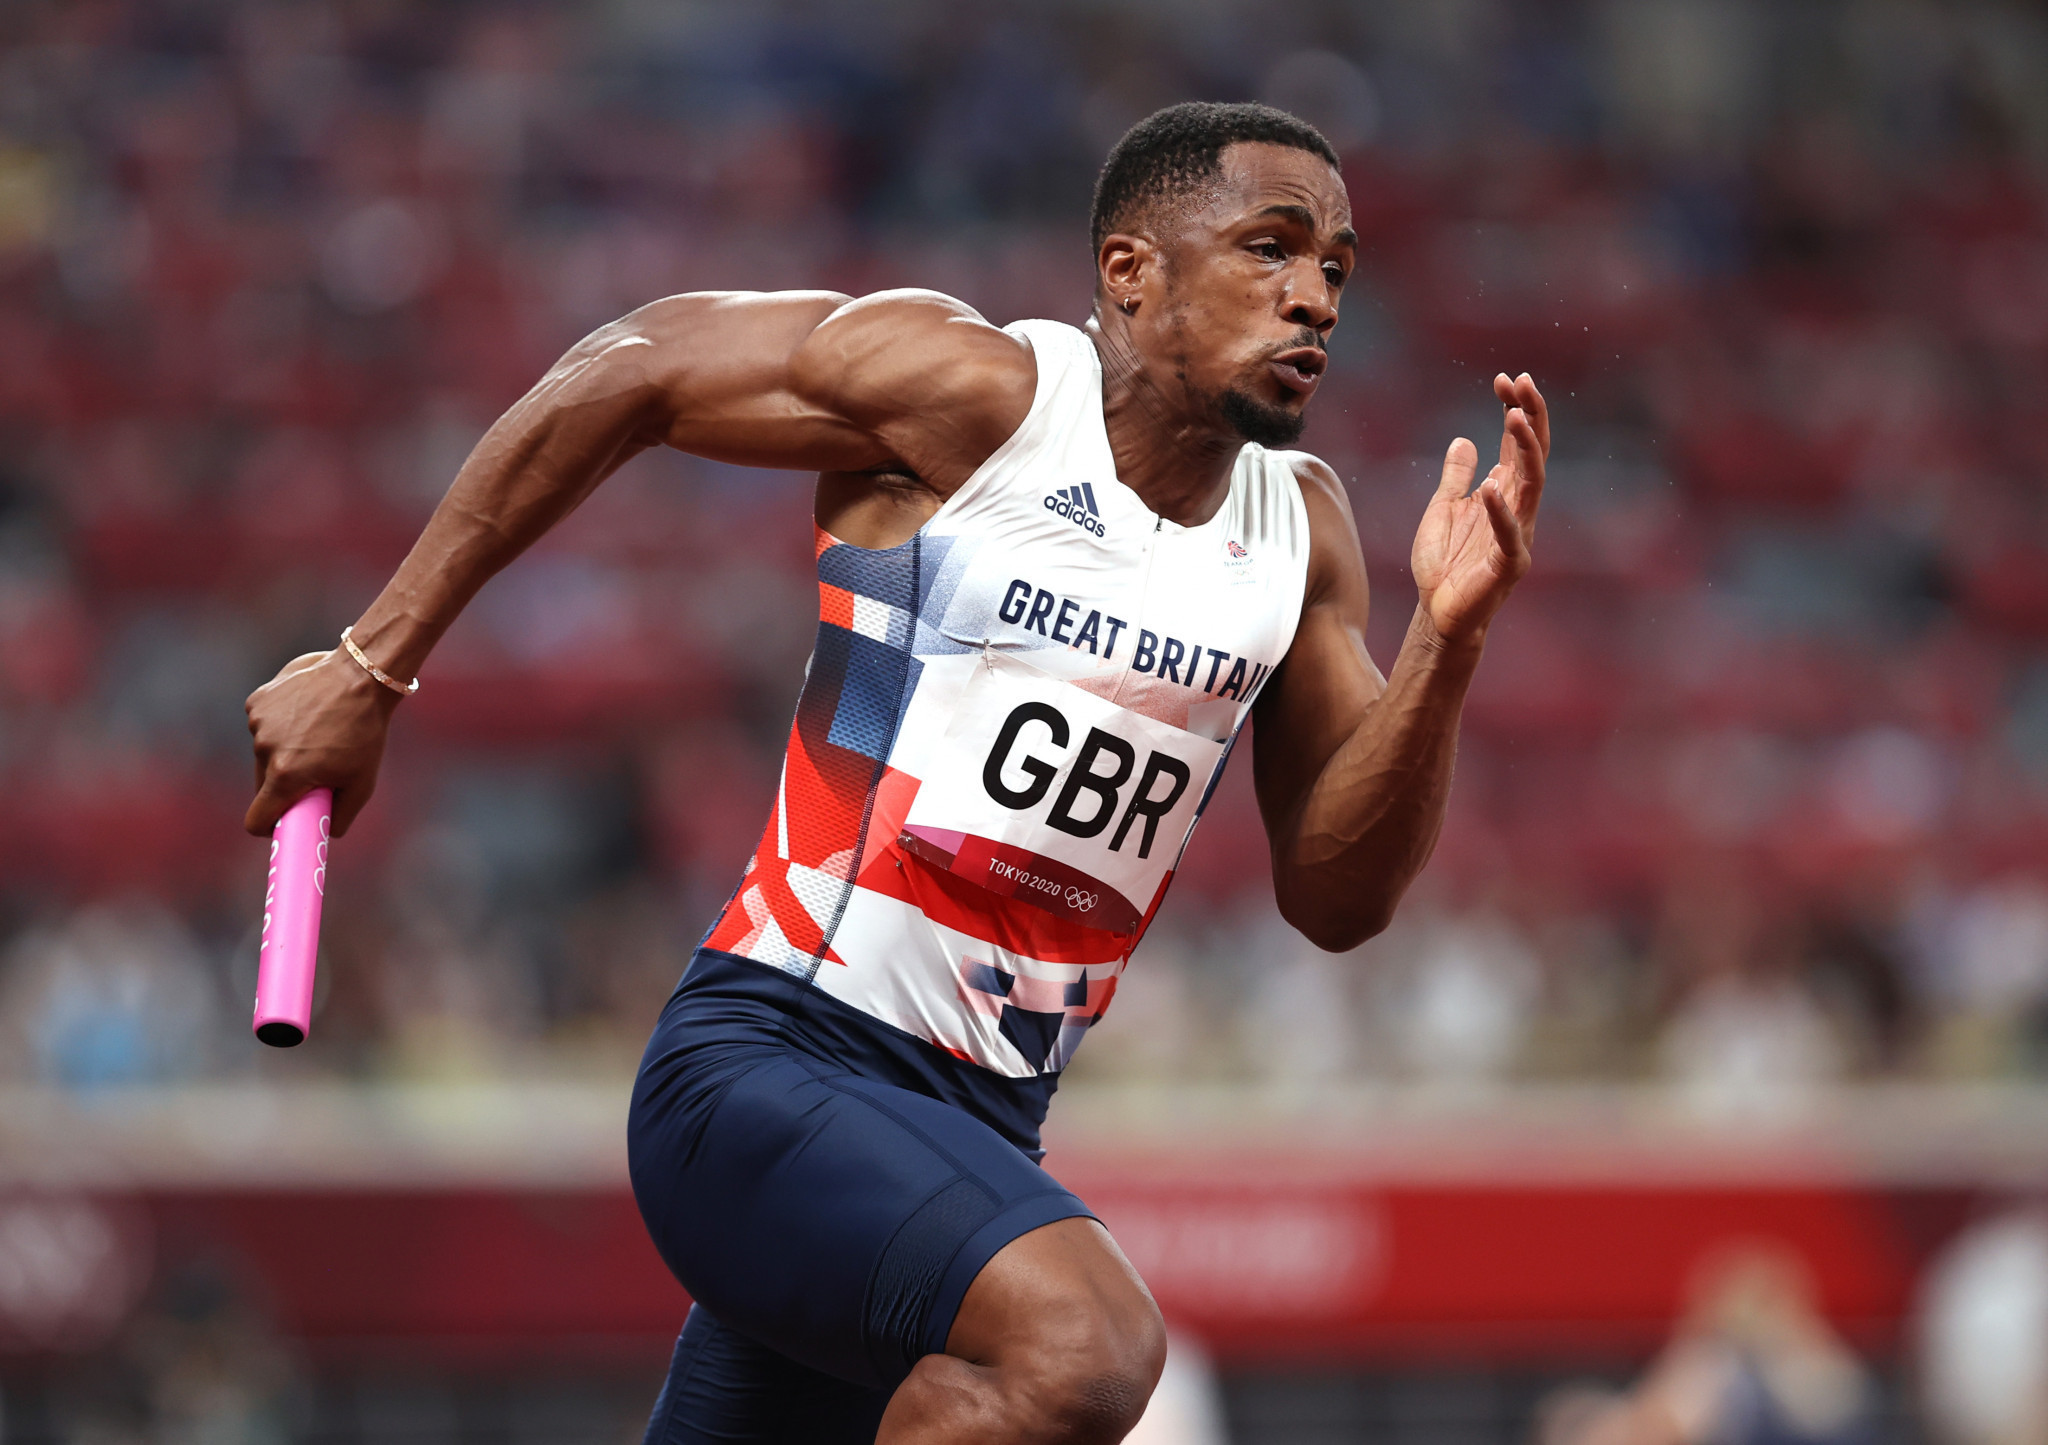 CJ Ujah helped Britain set a time of 37.51sec in the men's 4x100m relay at Tokyo 2020, but the team were disqualified after he tested positive for banned substances ©Getty Images